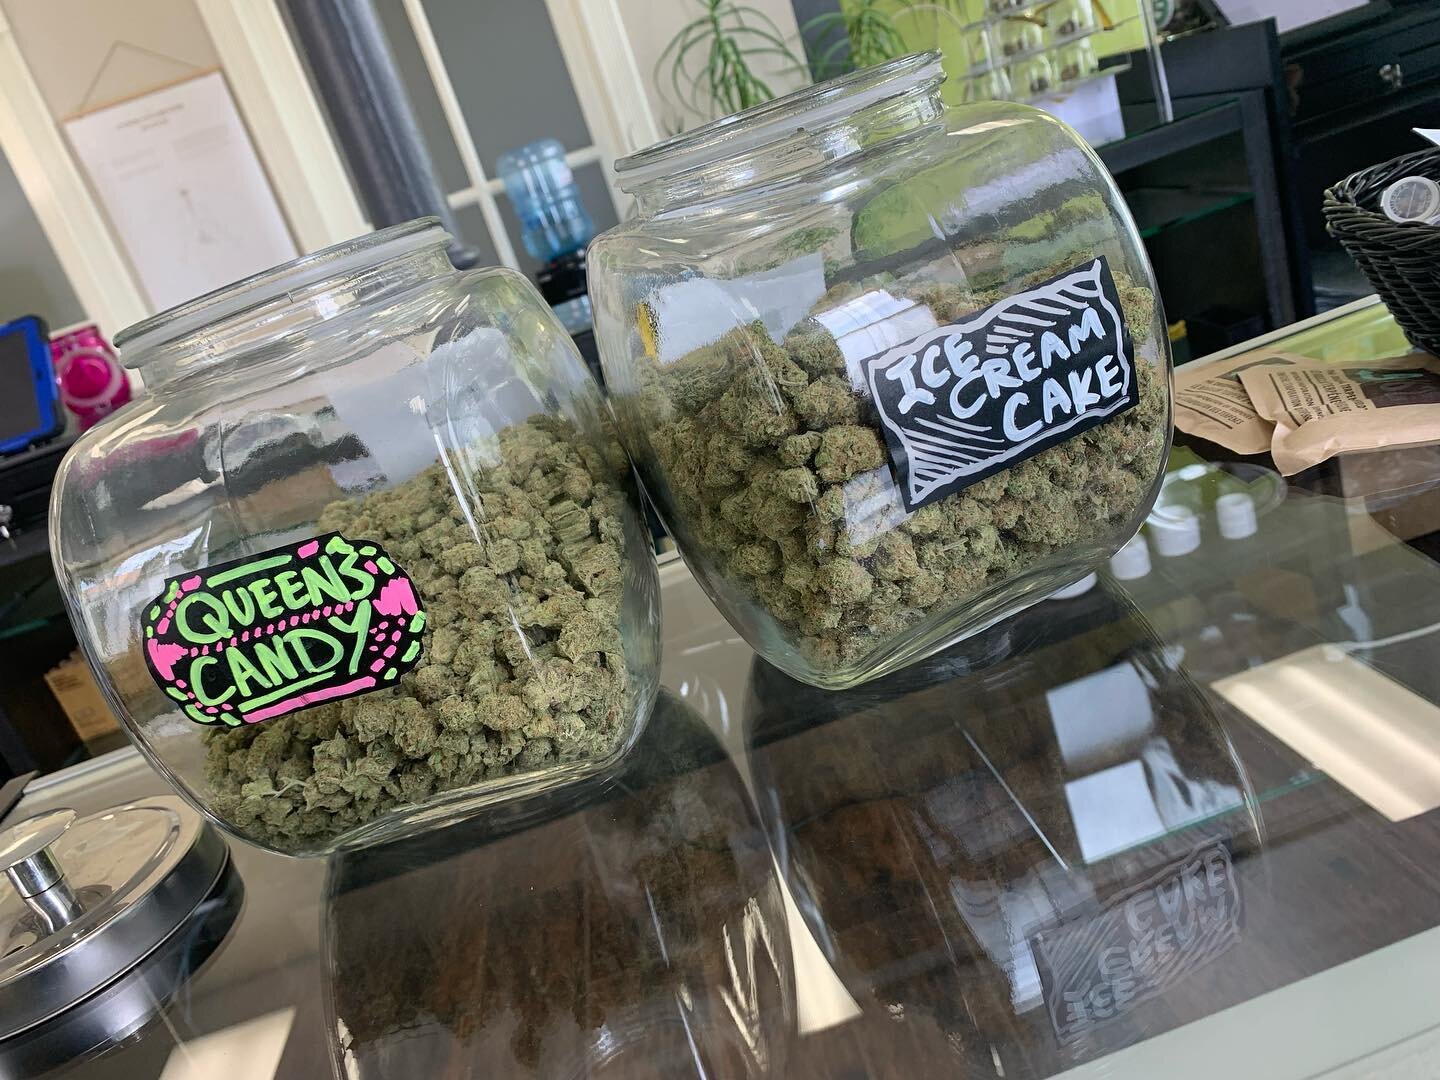 TWO new award winning strains fresh out on the the shelves. We got the &ldquo;Queens Candy&rdquo; a sativa leaning hybrid, coming in at 1ST place at the Montana Cannabis Lovers Cup in 2022. And then we have a classic favorite &ldquo;Ice Cream Cake&rd